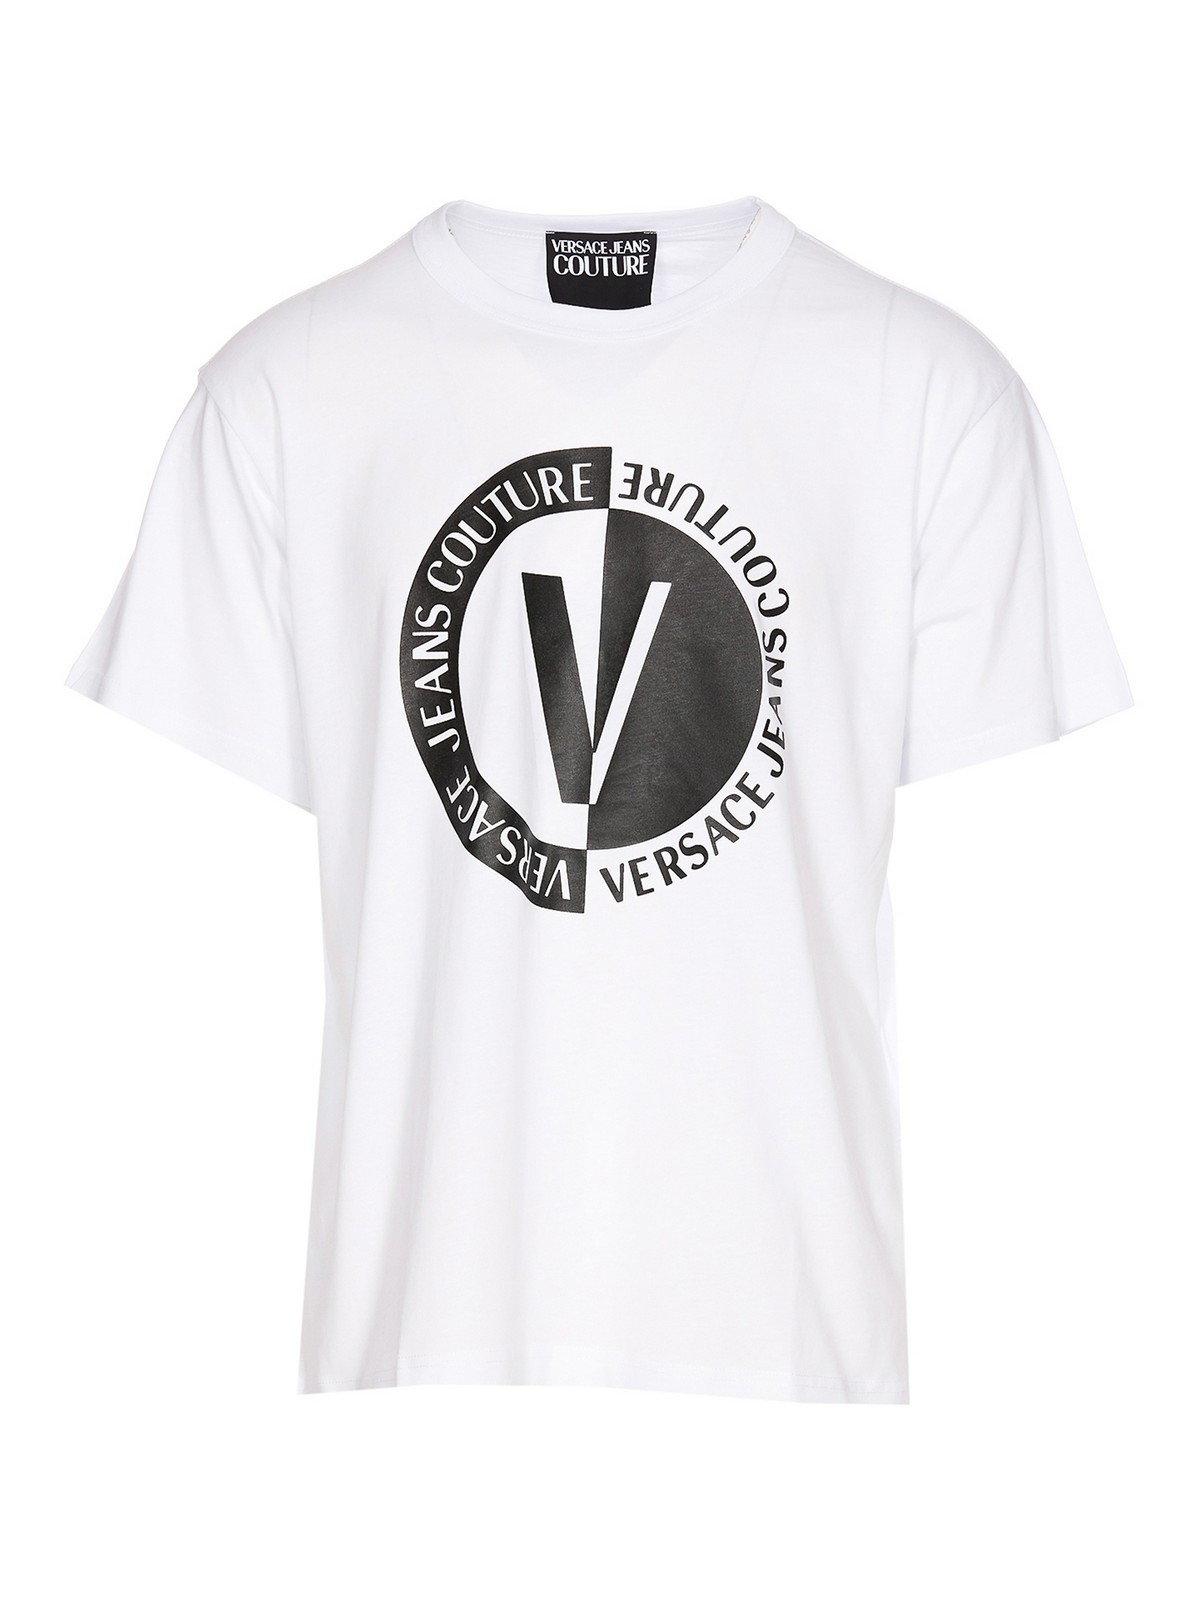 White V-Emblem T-Shirt by Versace Jeans Couture on Sale